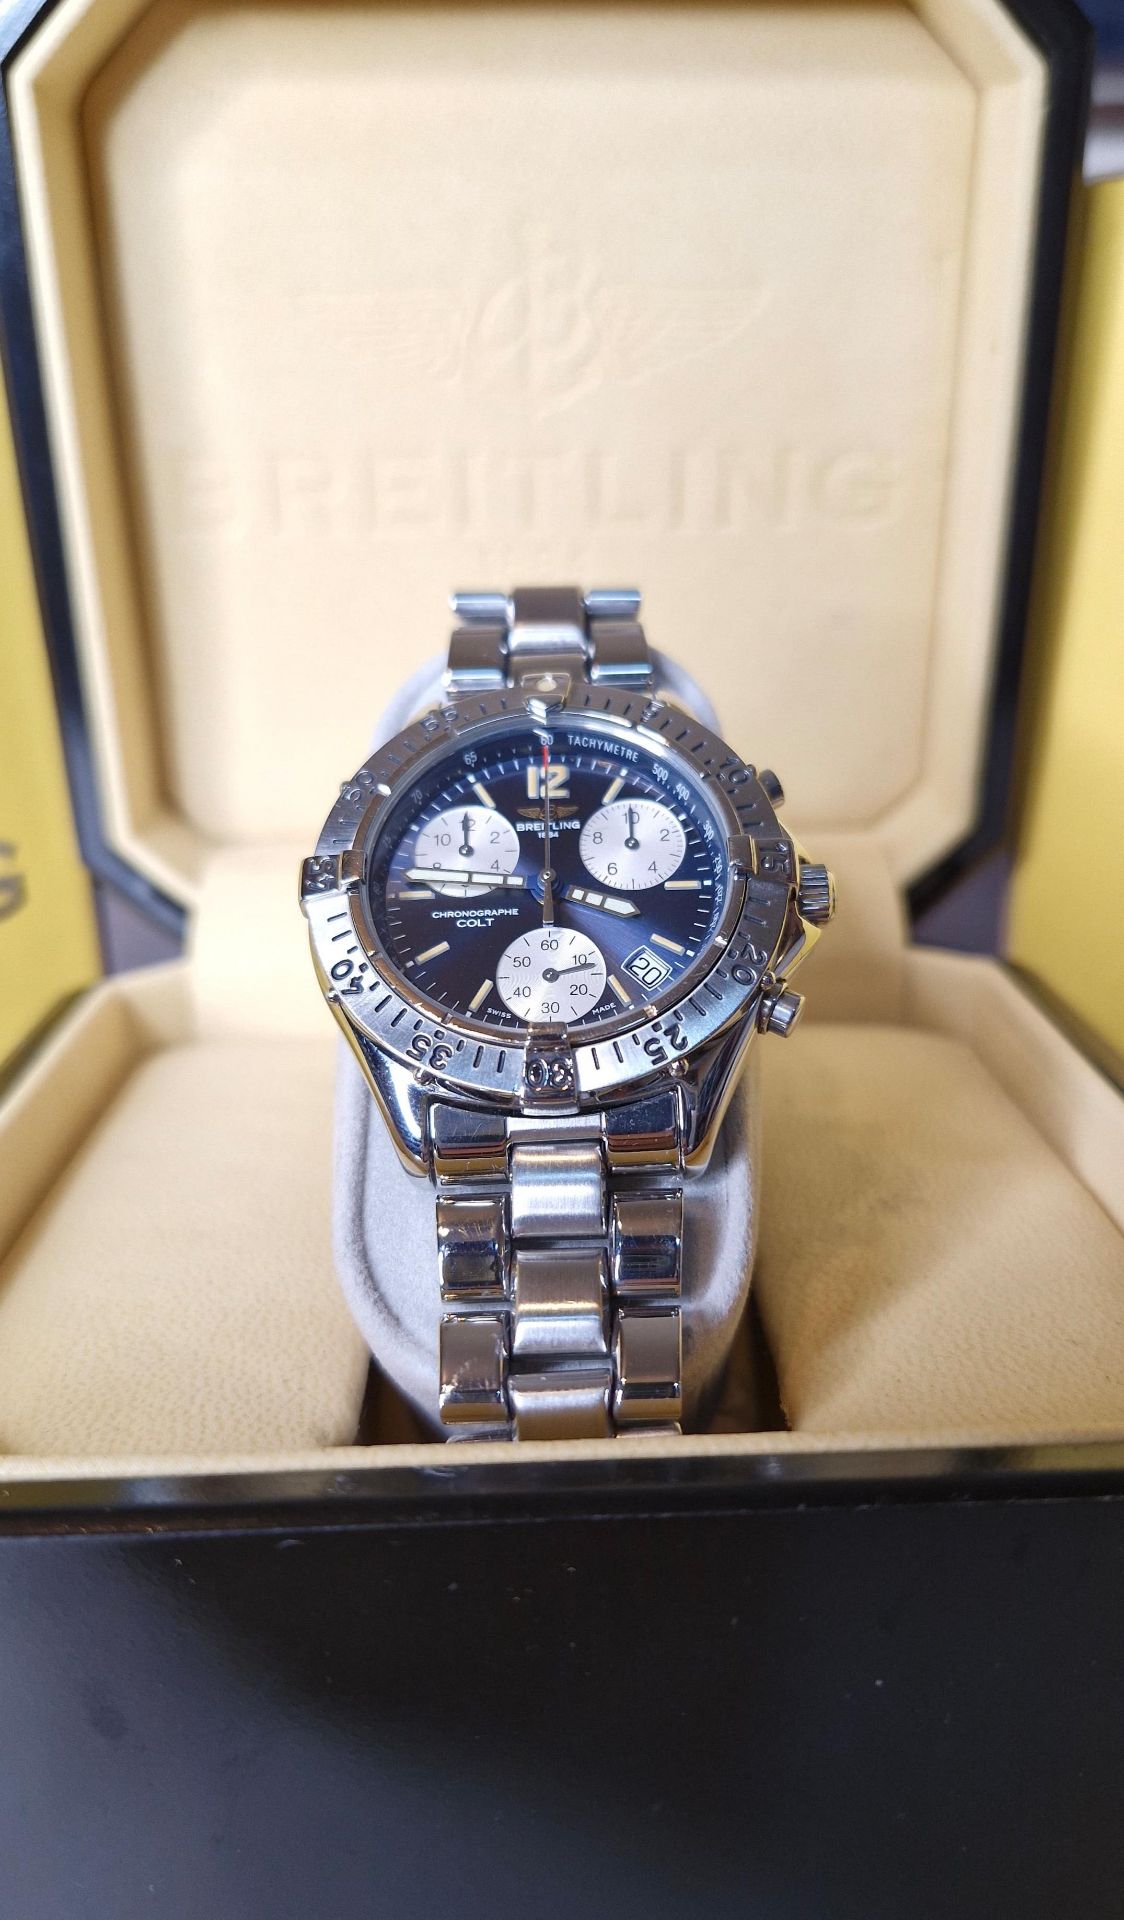 BREITLING CHRONOGRAPH MENS SWISS WATCH NO VAT - Image 7 of 8